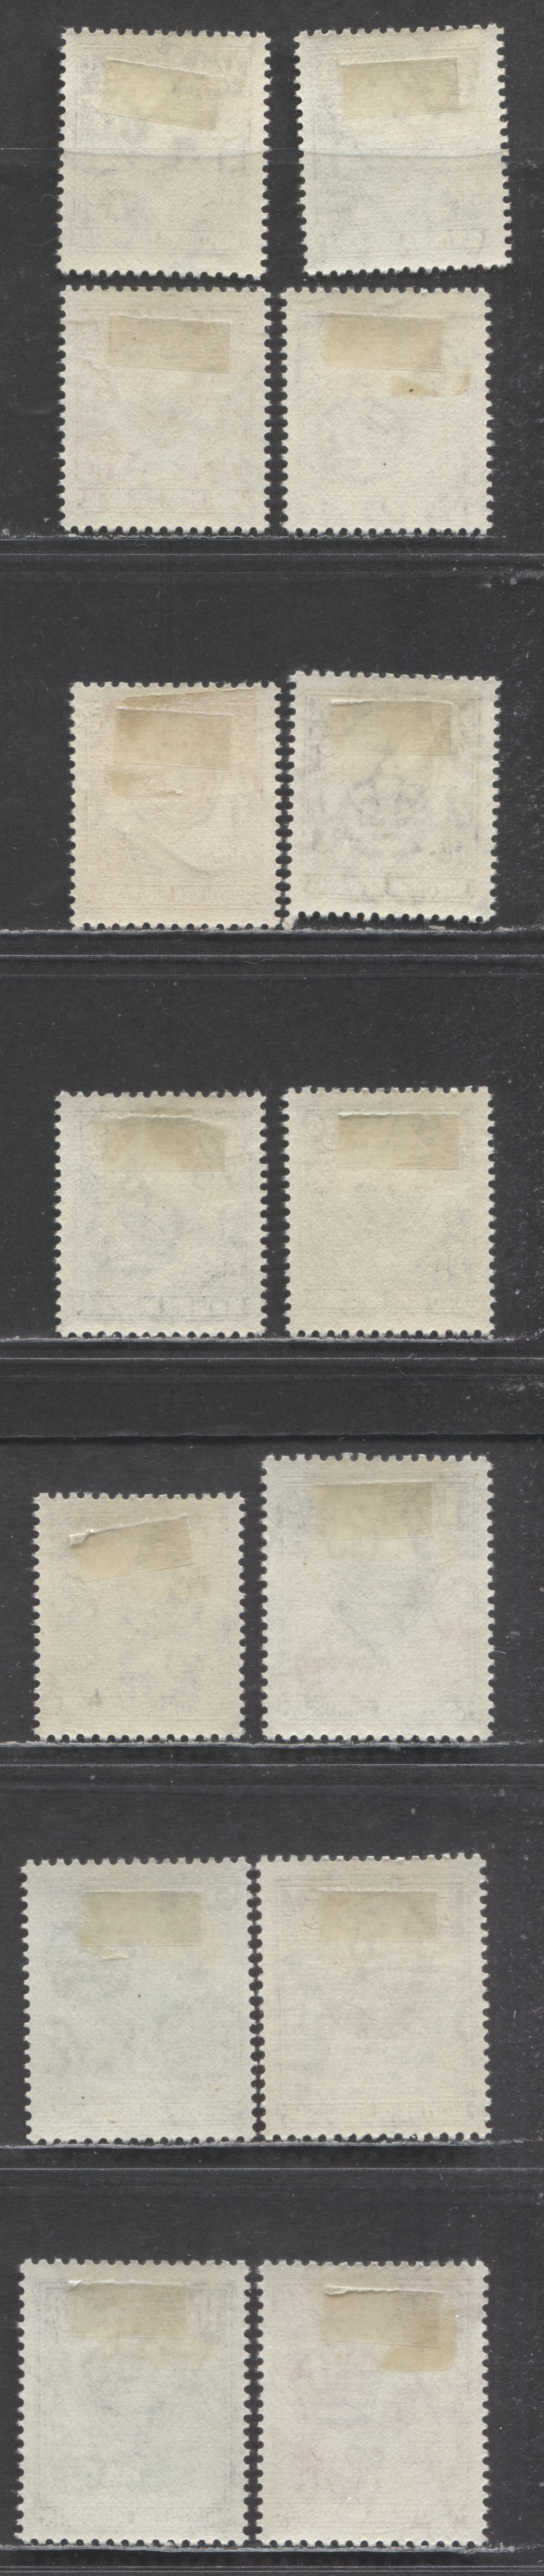 Lot 89 Northern Rhodesia SC#61-74 1953 Queen Elizabeth II Zambezi River Definitives, 14 VFOG Singles, Click on Listing to See ALL Pictures, Estimated Value $42